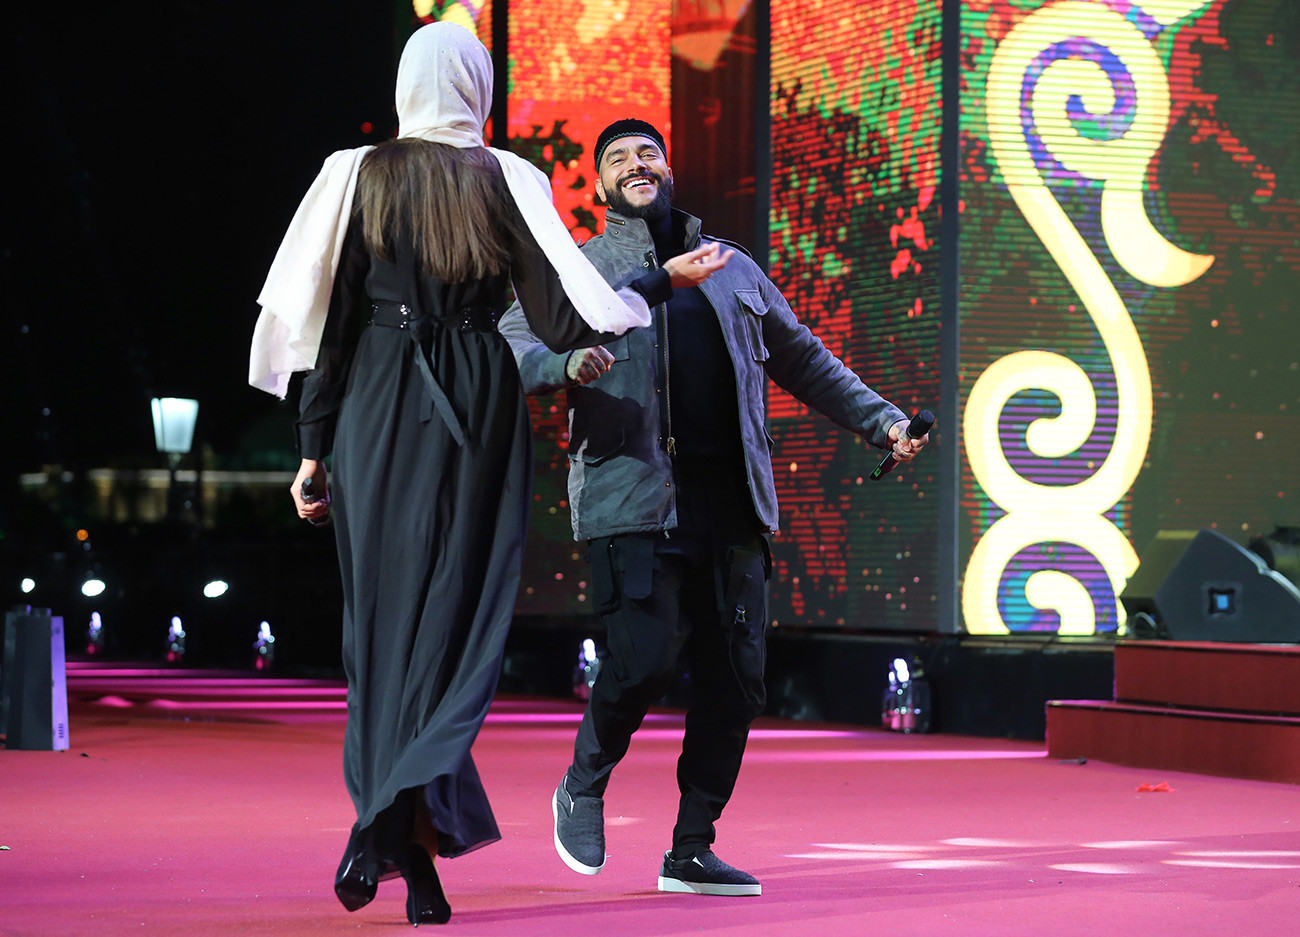 Timati performs on the celebration the 200th anniversary of the city of Grozny, Chechen republic, Russia 